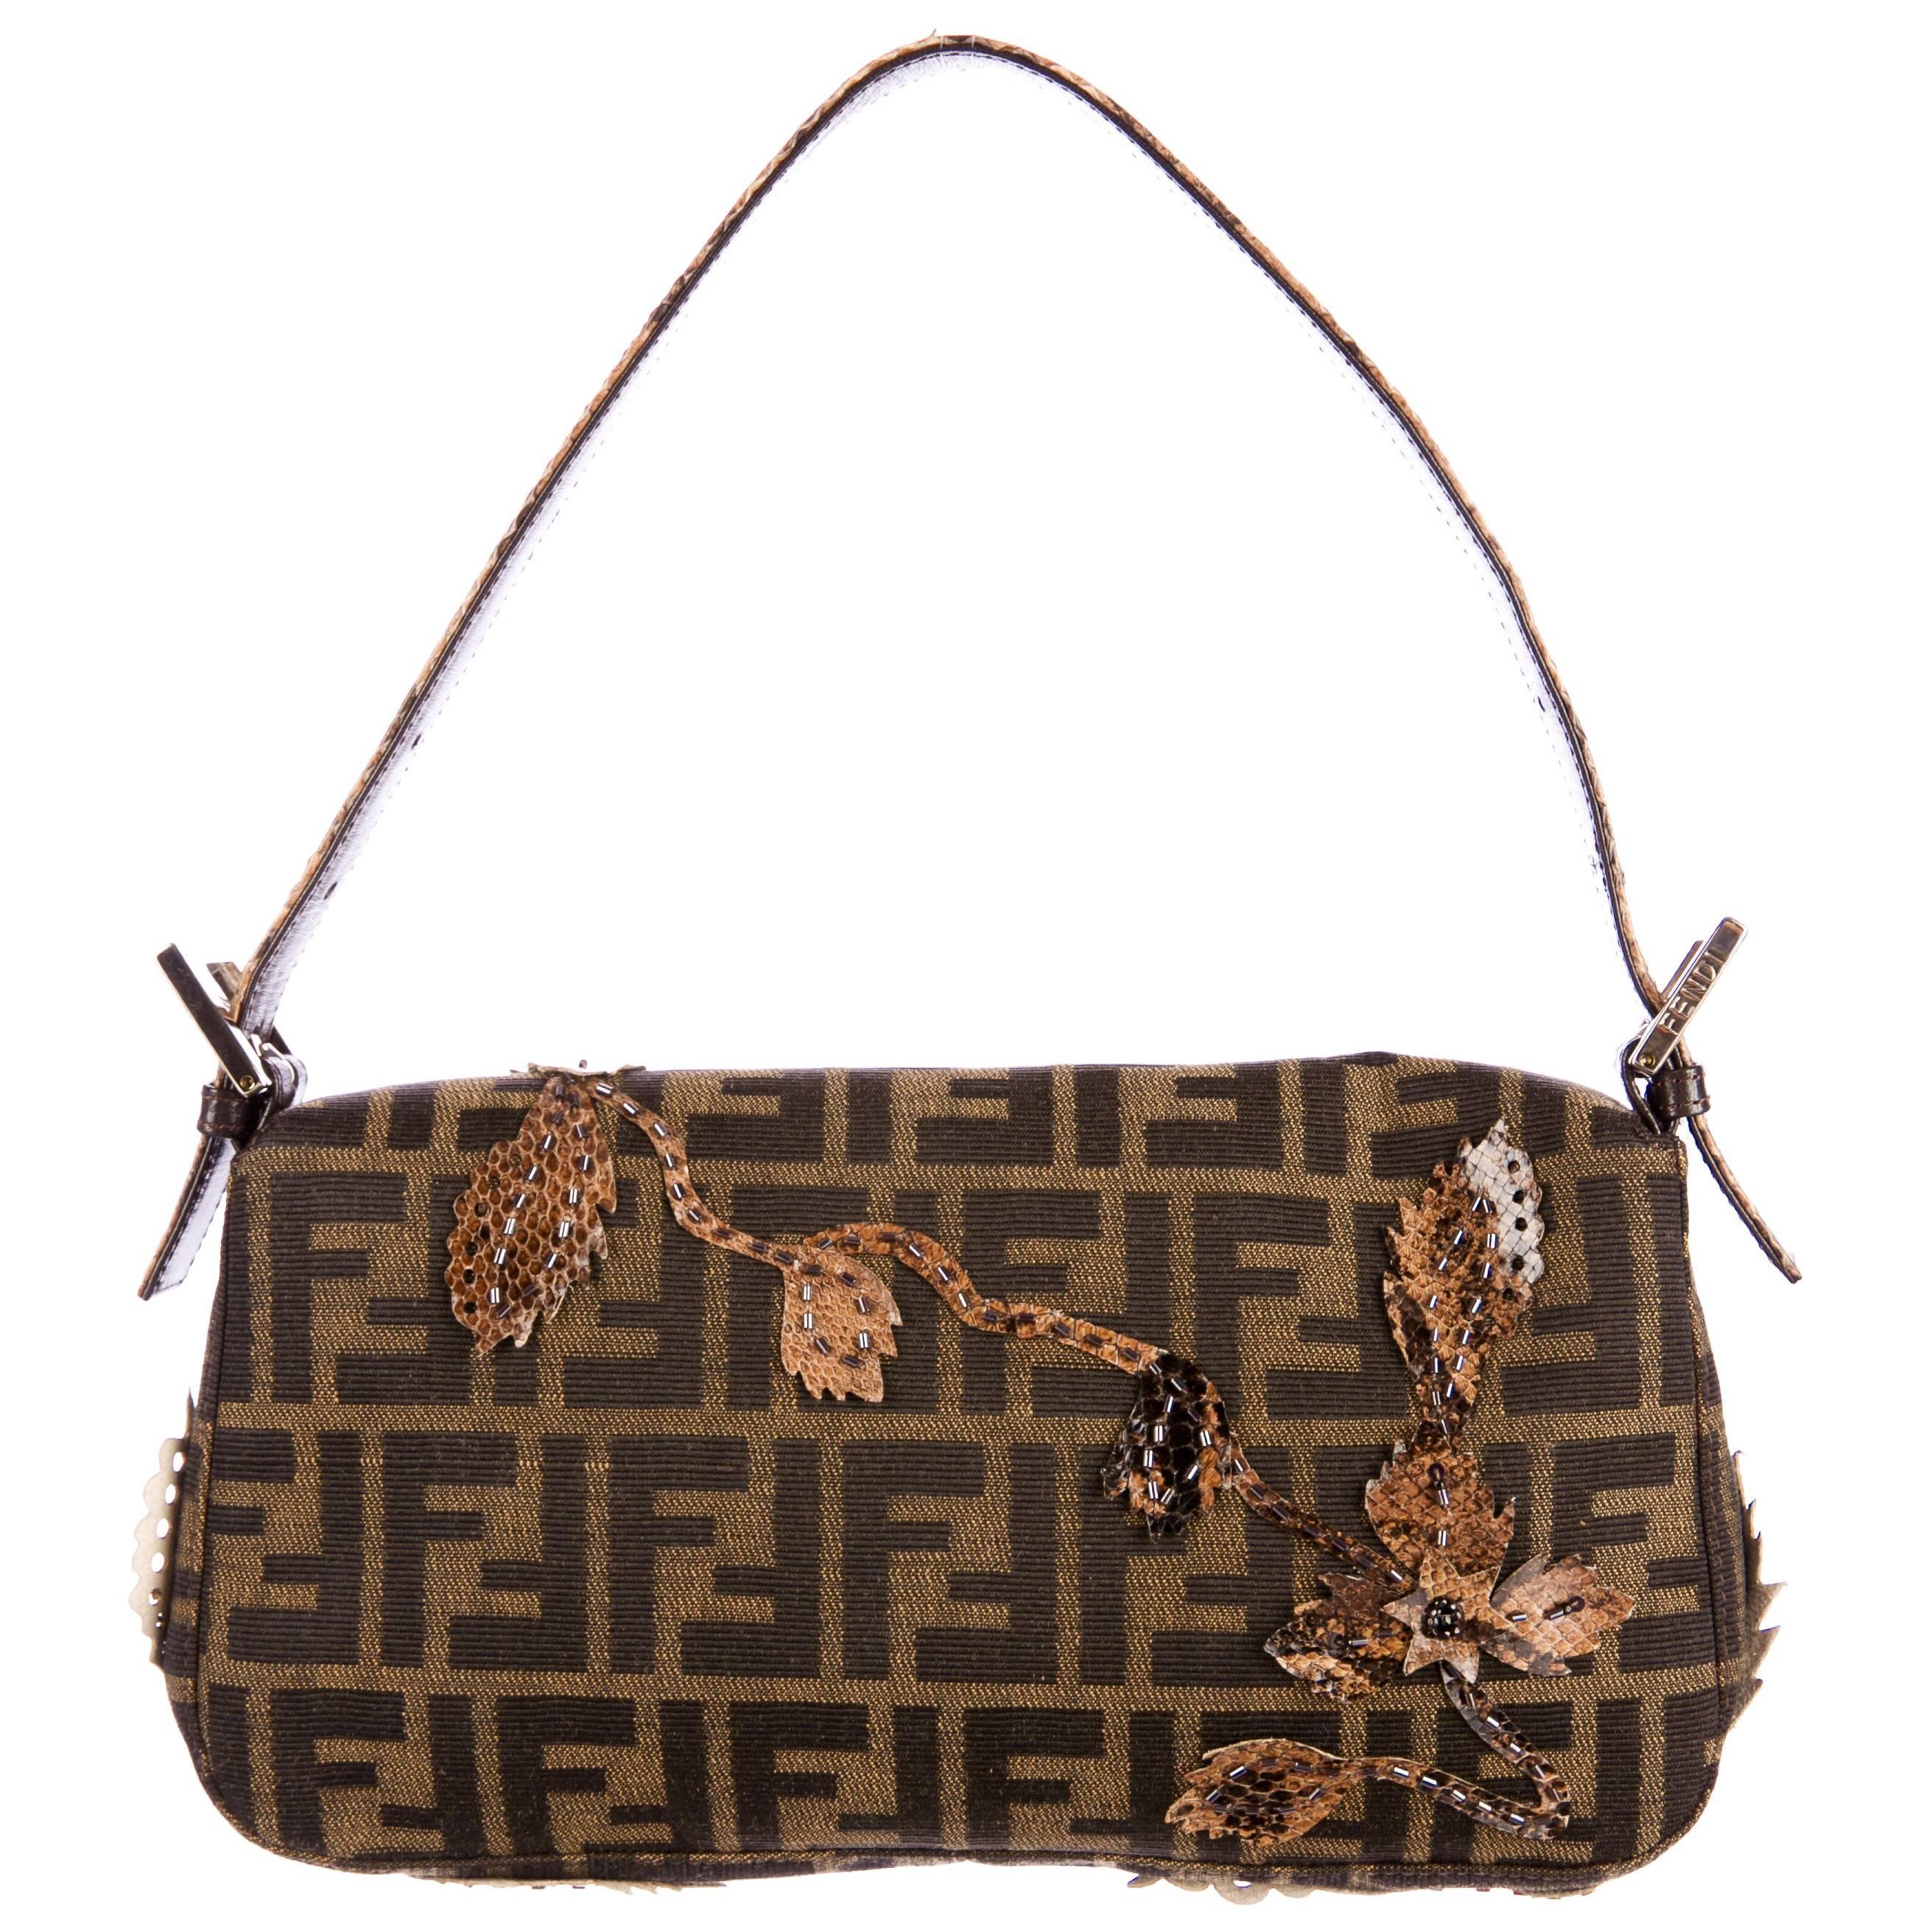 New Fendi Zucca Python Baguette Bag Featured in the 15th Anniversary Book 5